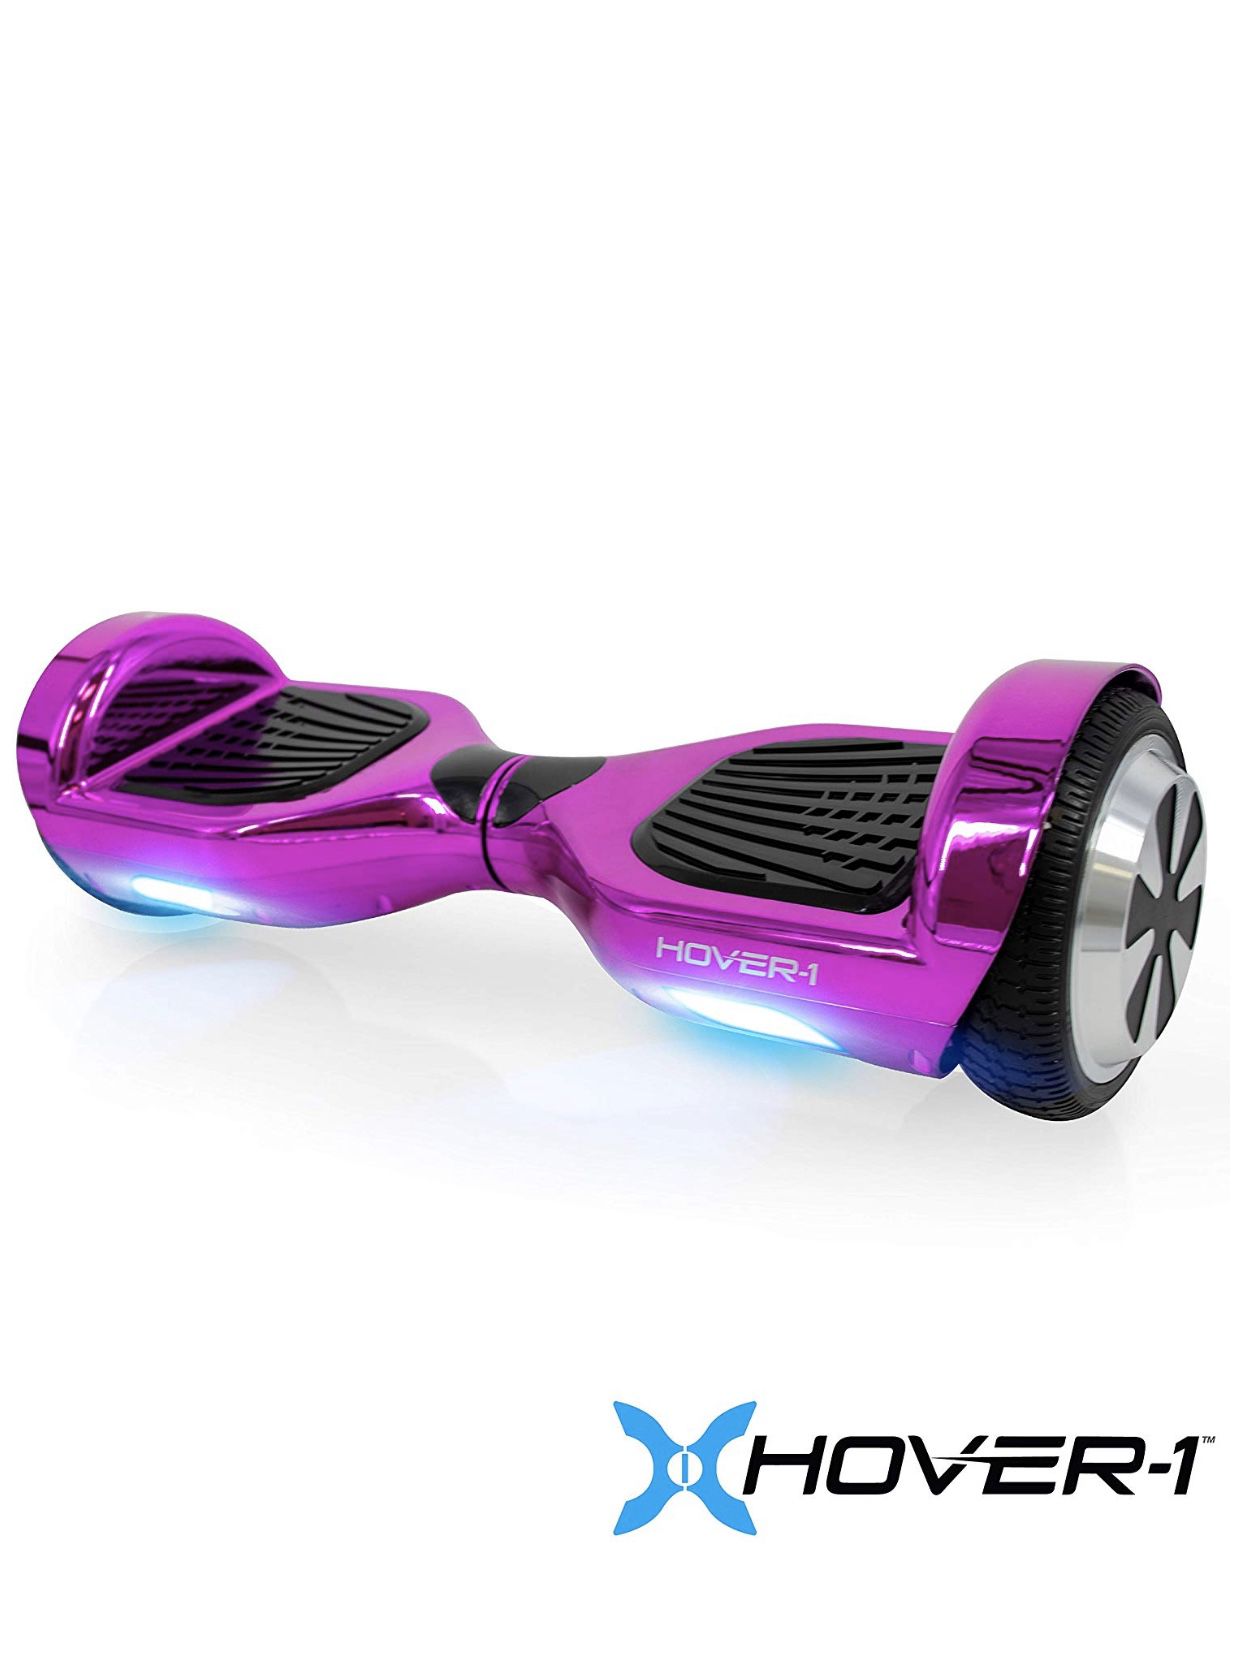 Hover-1 Ultra Hoverboard Electric Scooter